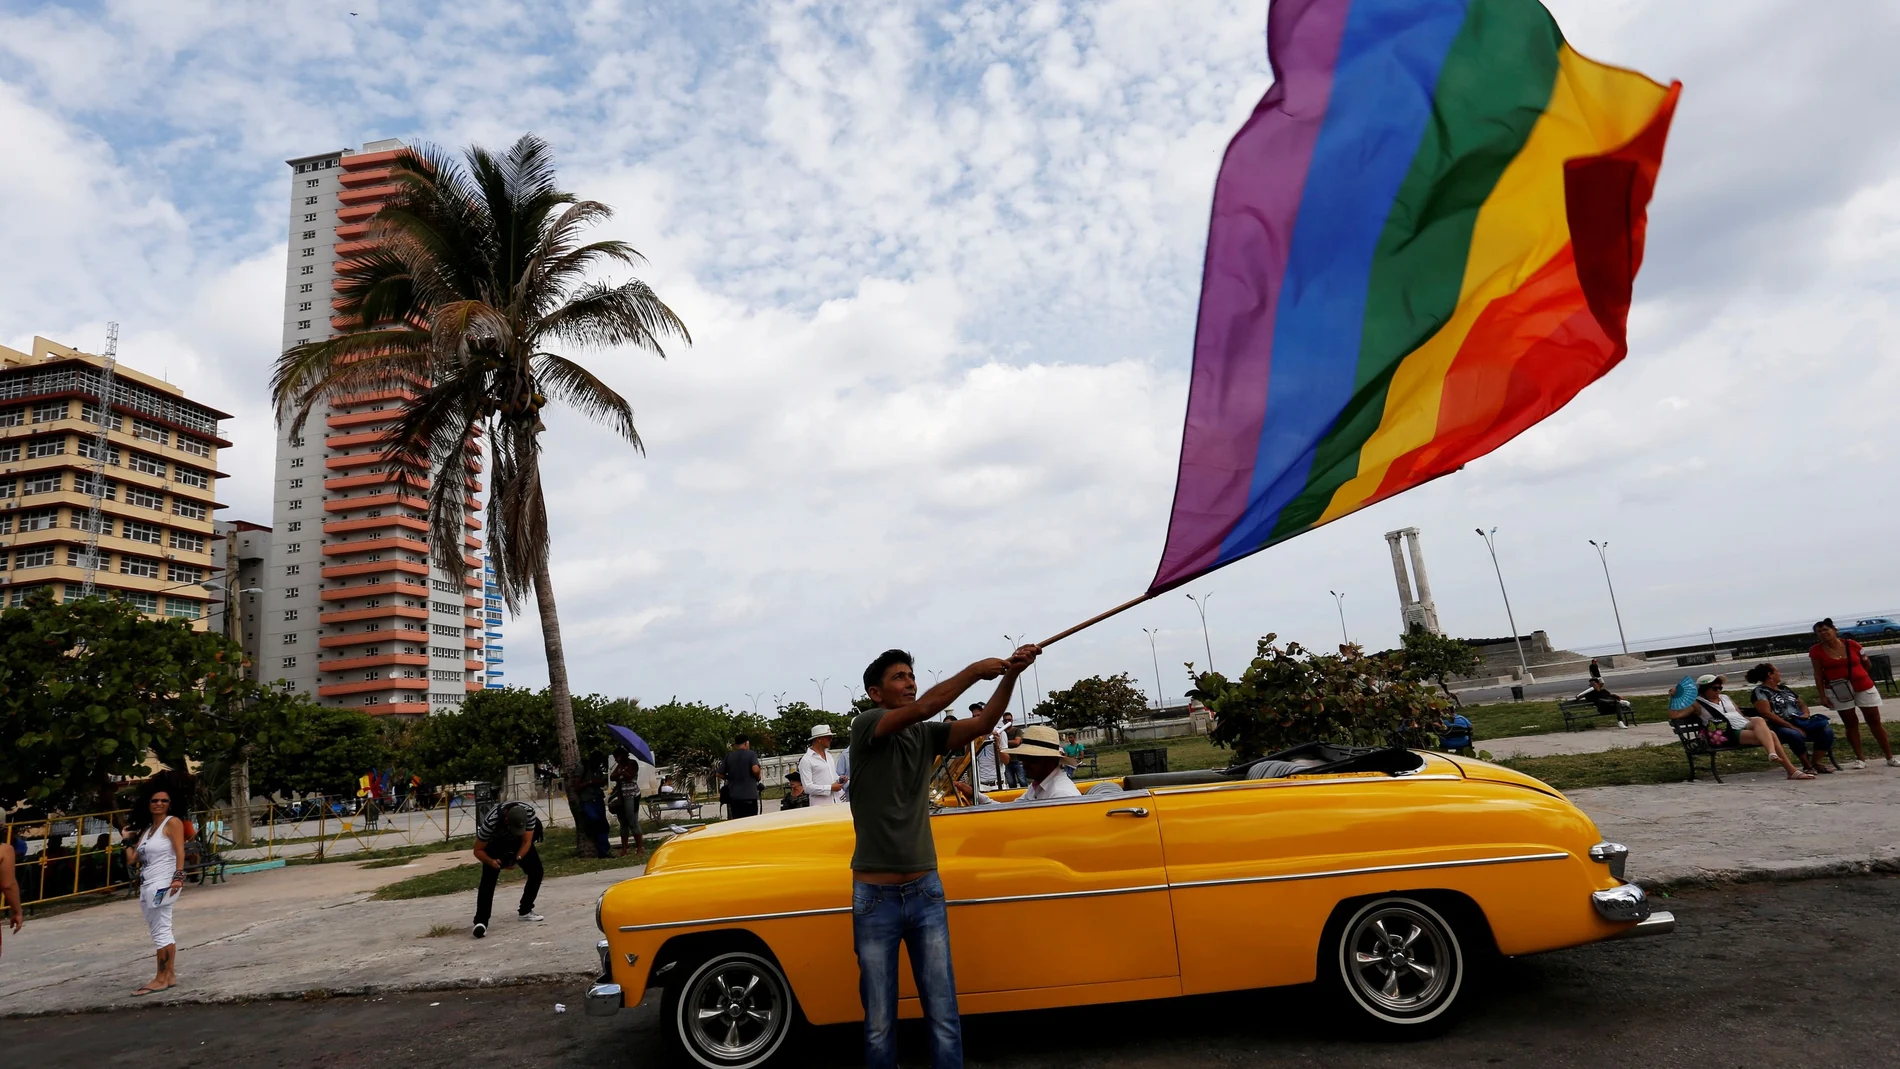 FILE PHOTO: Participant waves a rainbow flag during the annual March against Homophobia and Transphobia in Havana, Cuba May 13, 2017. REUTERS/Stringer/File Photo